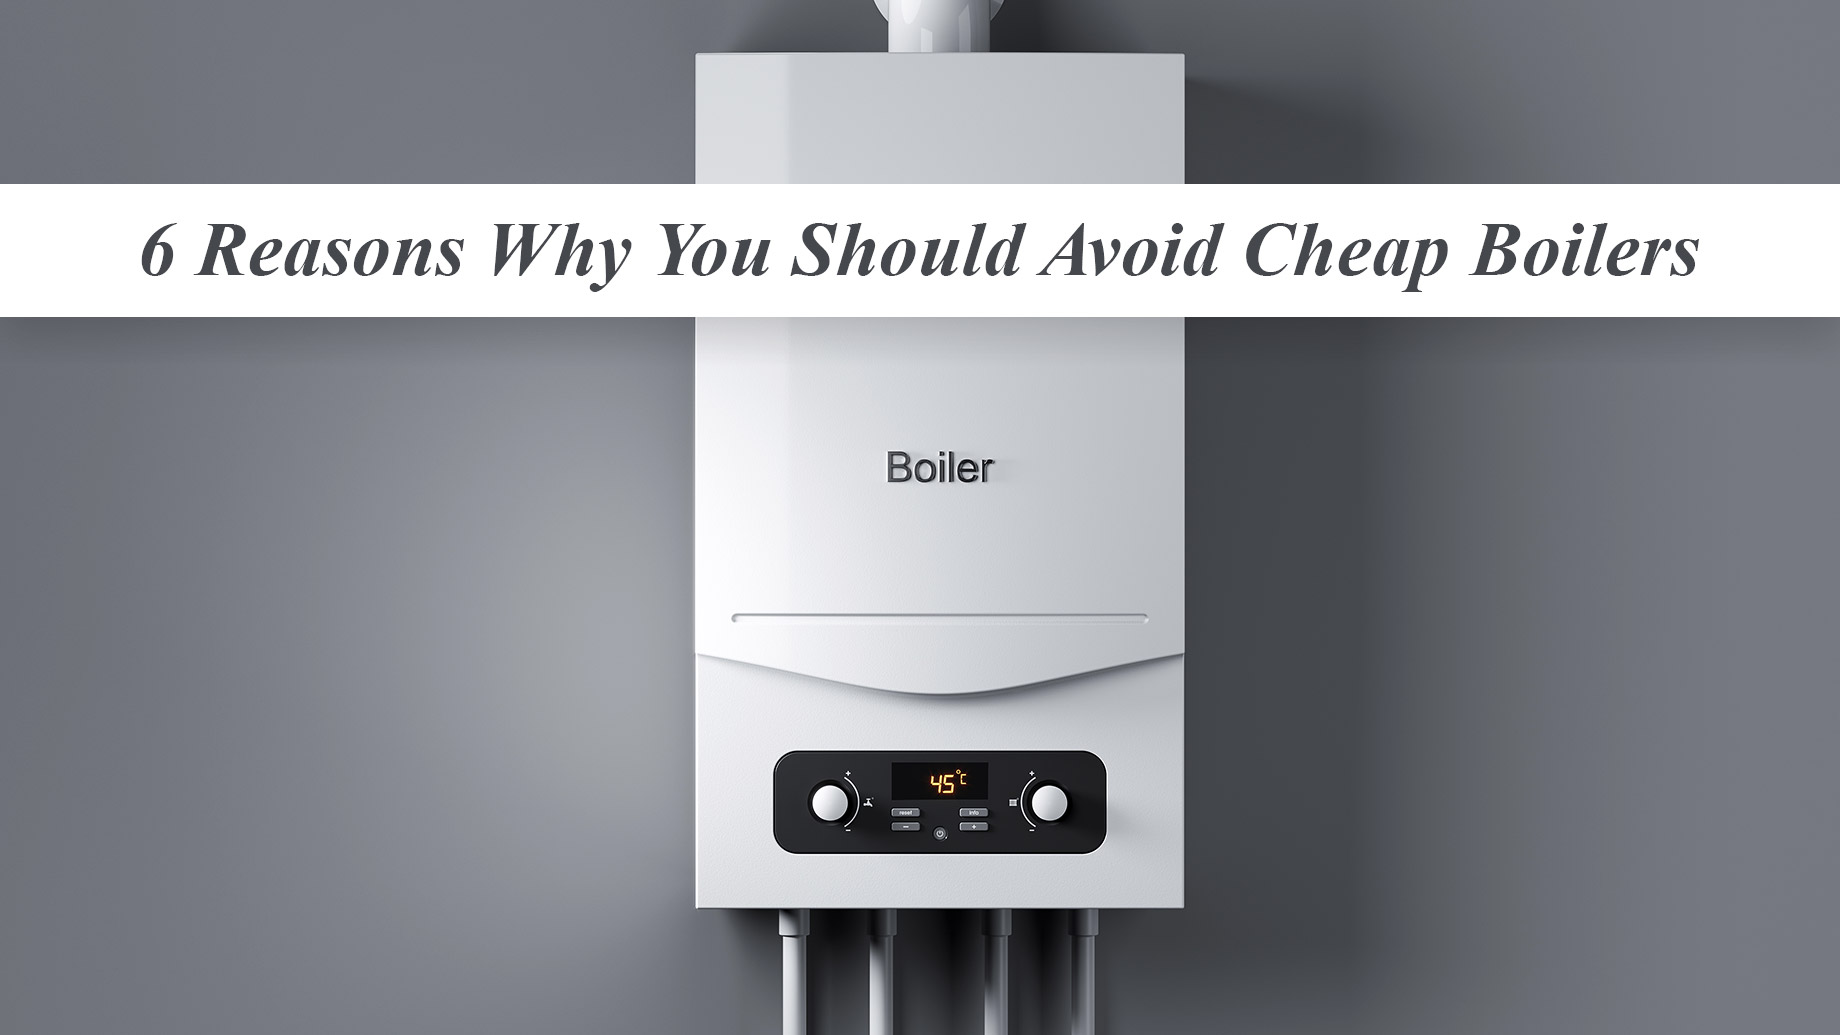 6 Reasons Why You Should Avoid Cheap Boilers